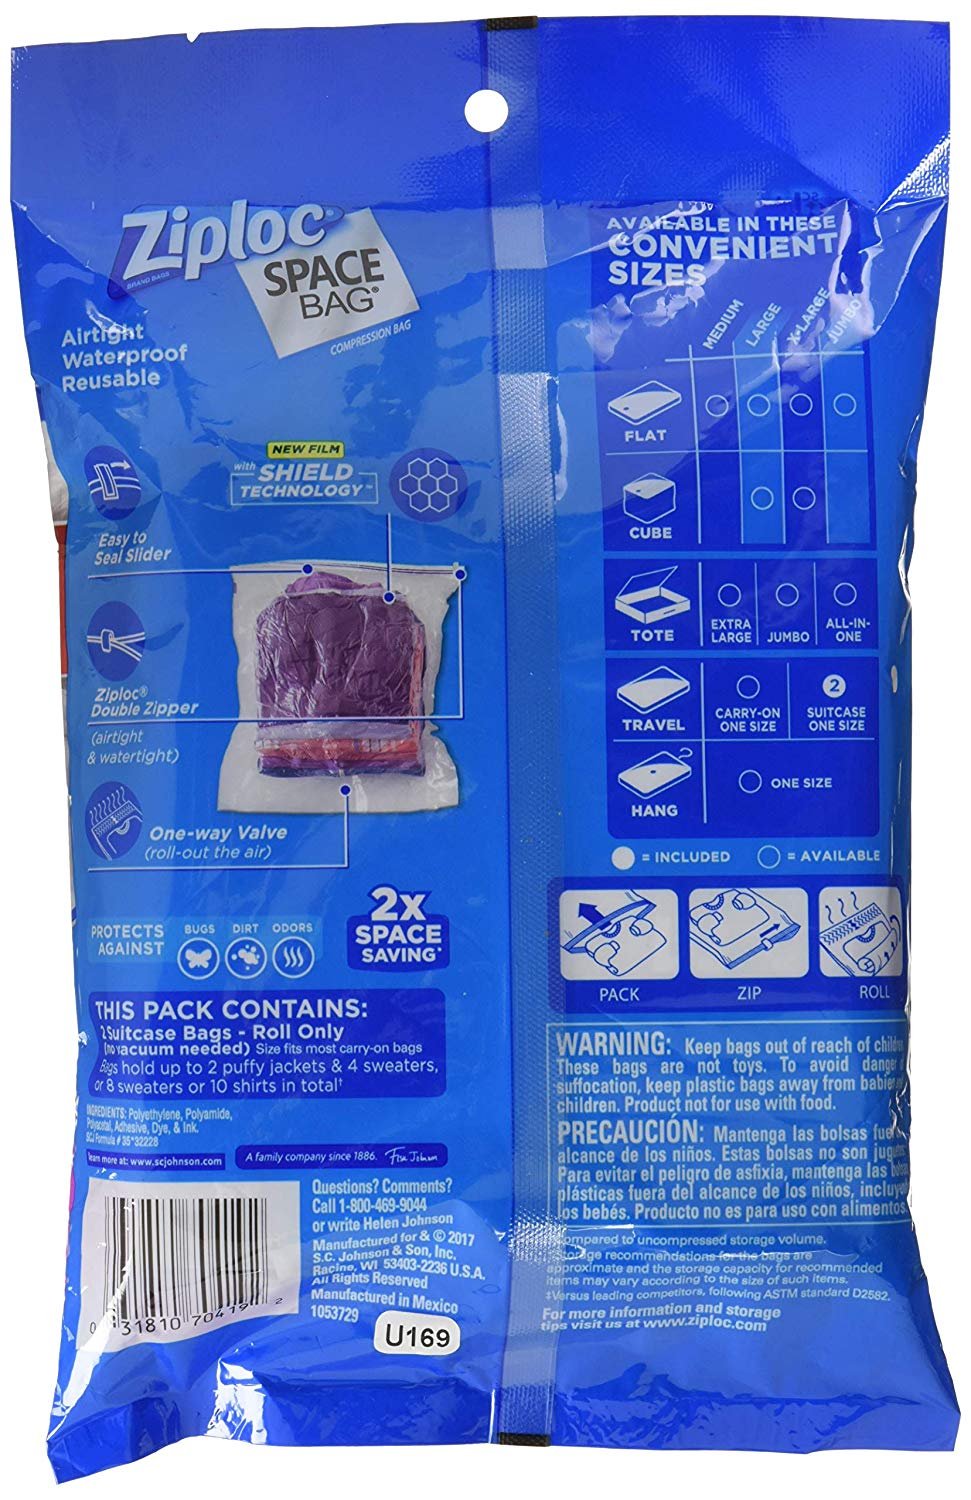 Ziploc Space Bag, Travel Bags - Poly Pack, 1 Pack - image 3 of 5